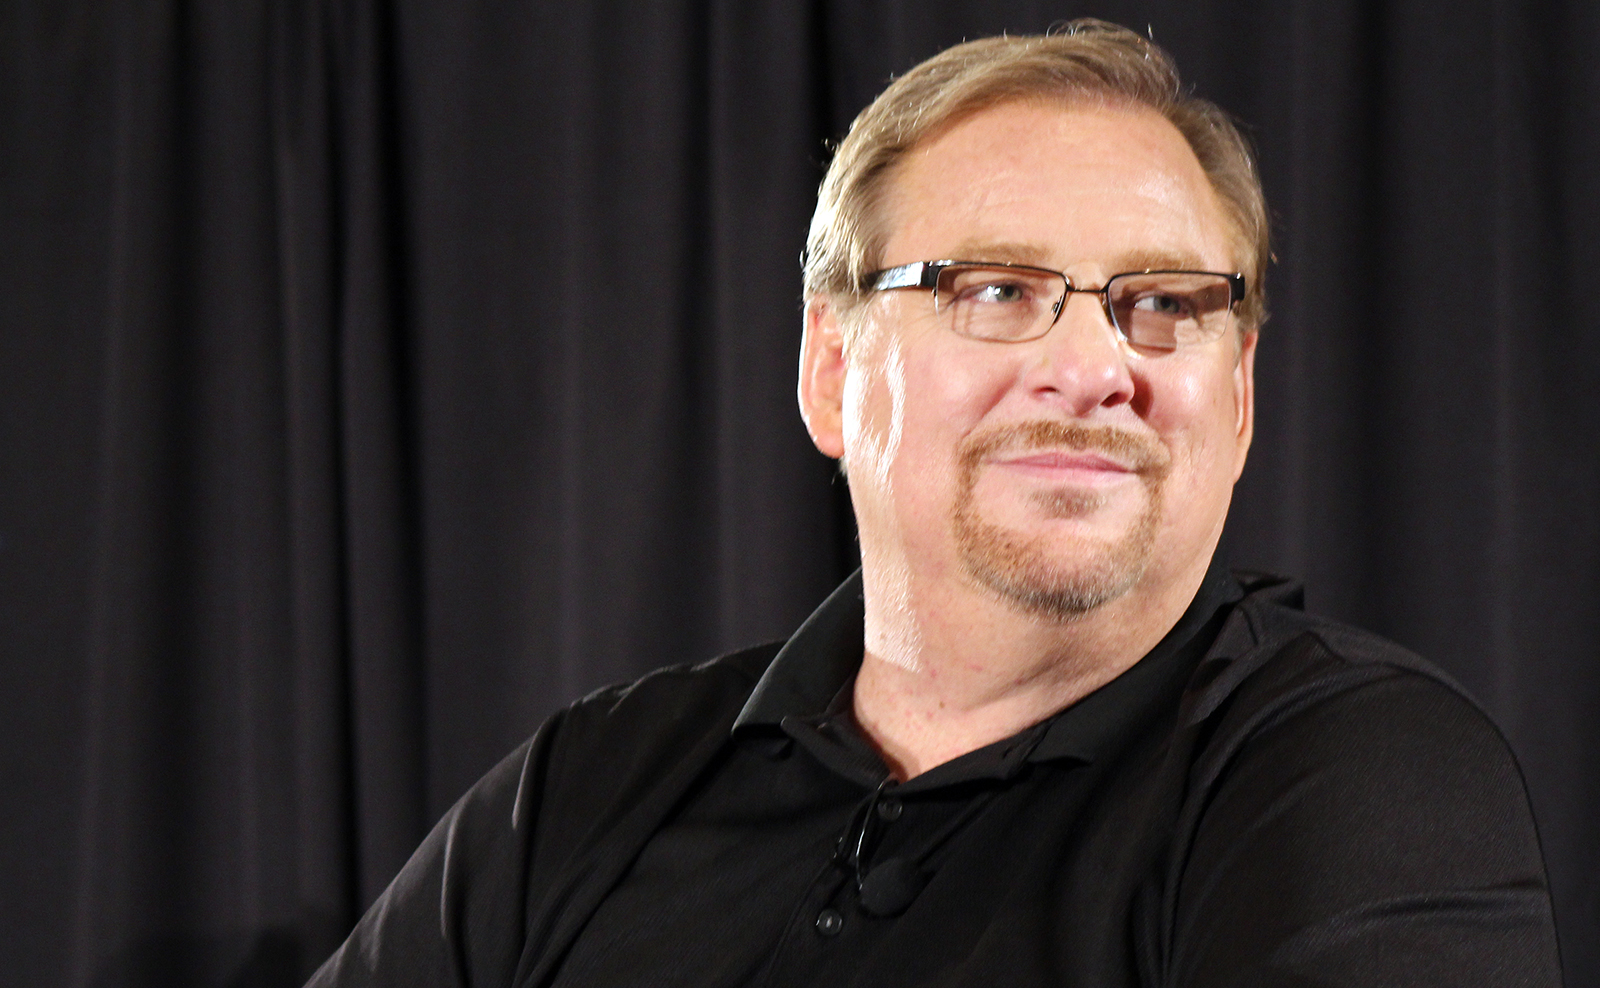 Pastor Rick Warren during a panel discussion in Baltimore in June 2014. RNS photo by Adelle M. Banks